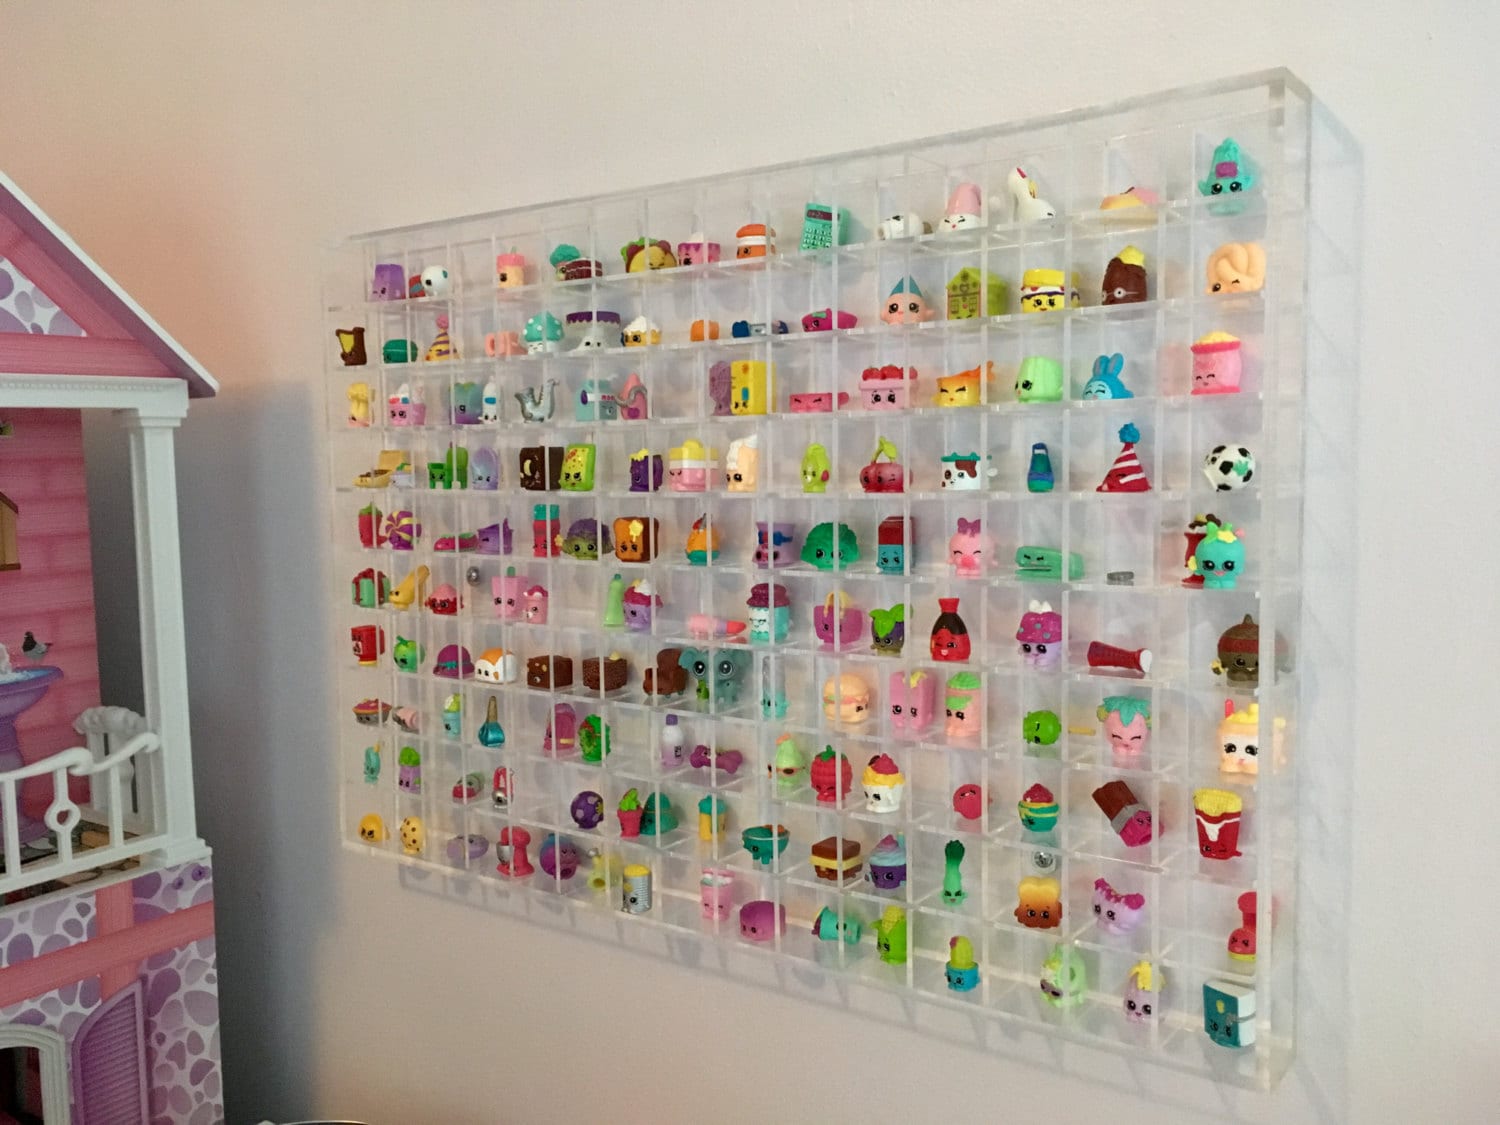 Shopkins lot of 48 with display case